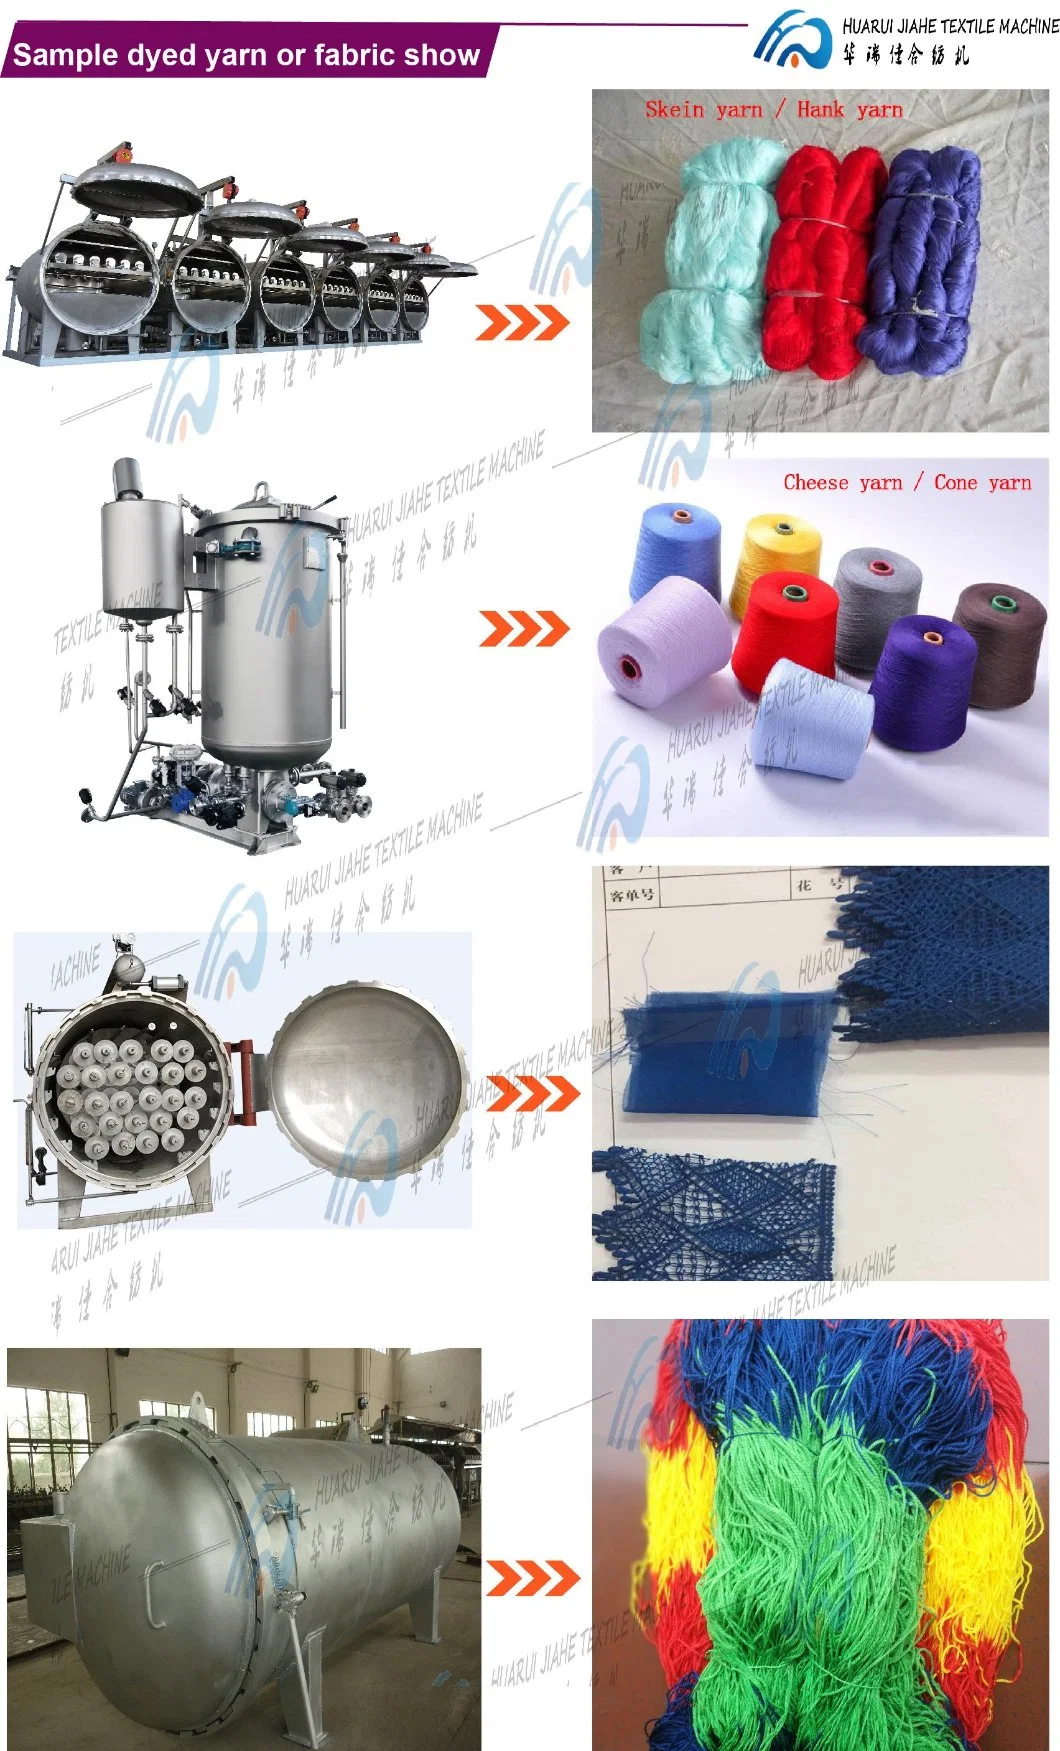 Durable Spray Pipe 20kg to 100kg Normal Temperature Spray Type Textile Hank Yarn Dyeing Machine Automatic Dyeing Machine Manufacturer